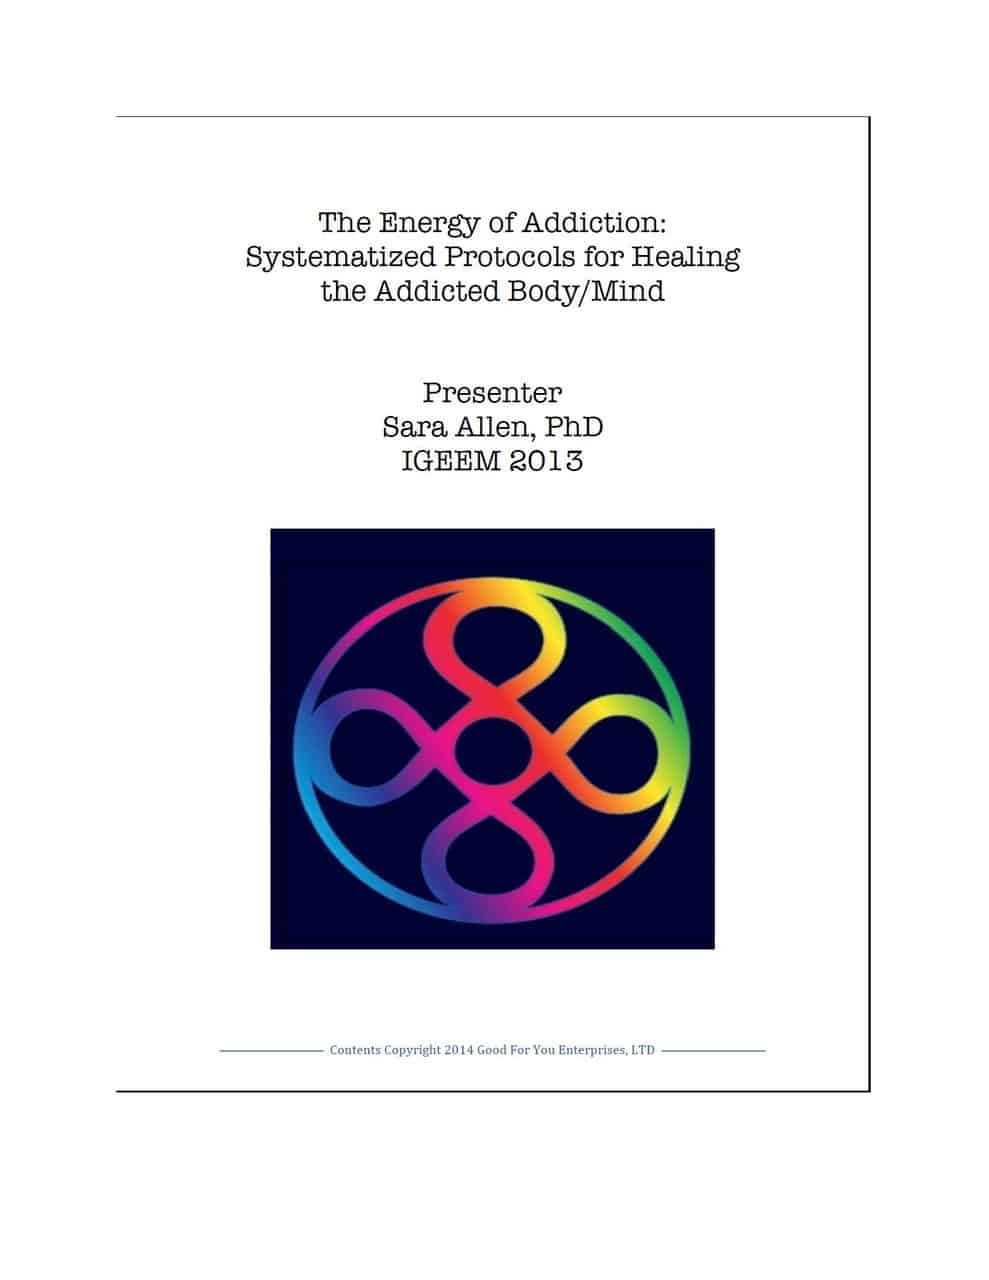 The Energy of Addiction: Systematized Protocols for Healing the Addicted Body/Mind (DVD w/Handout)